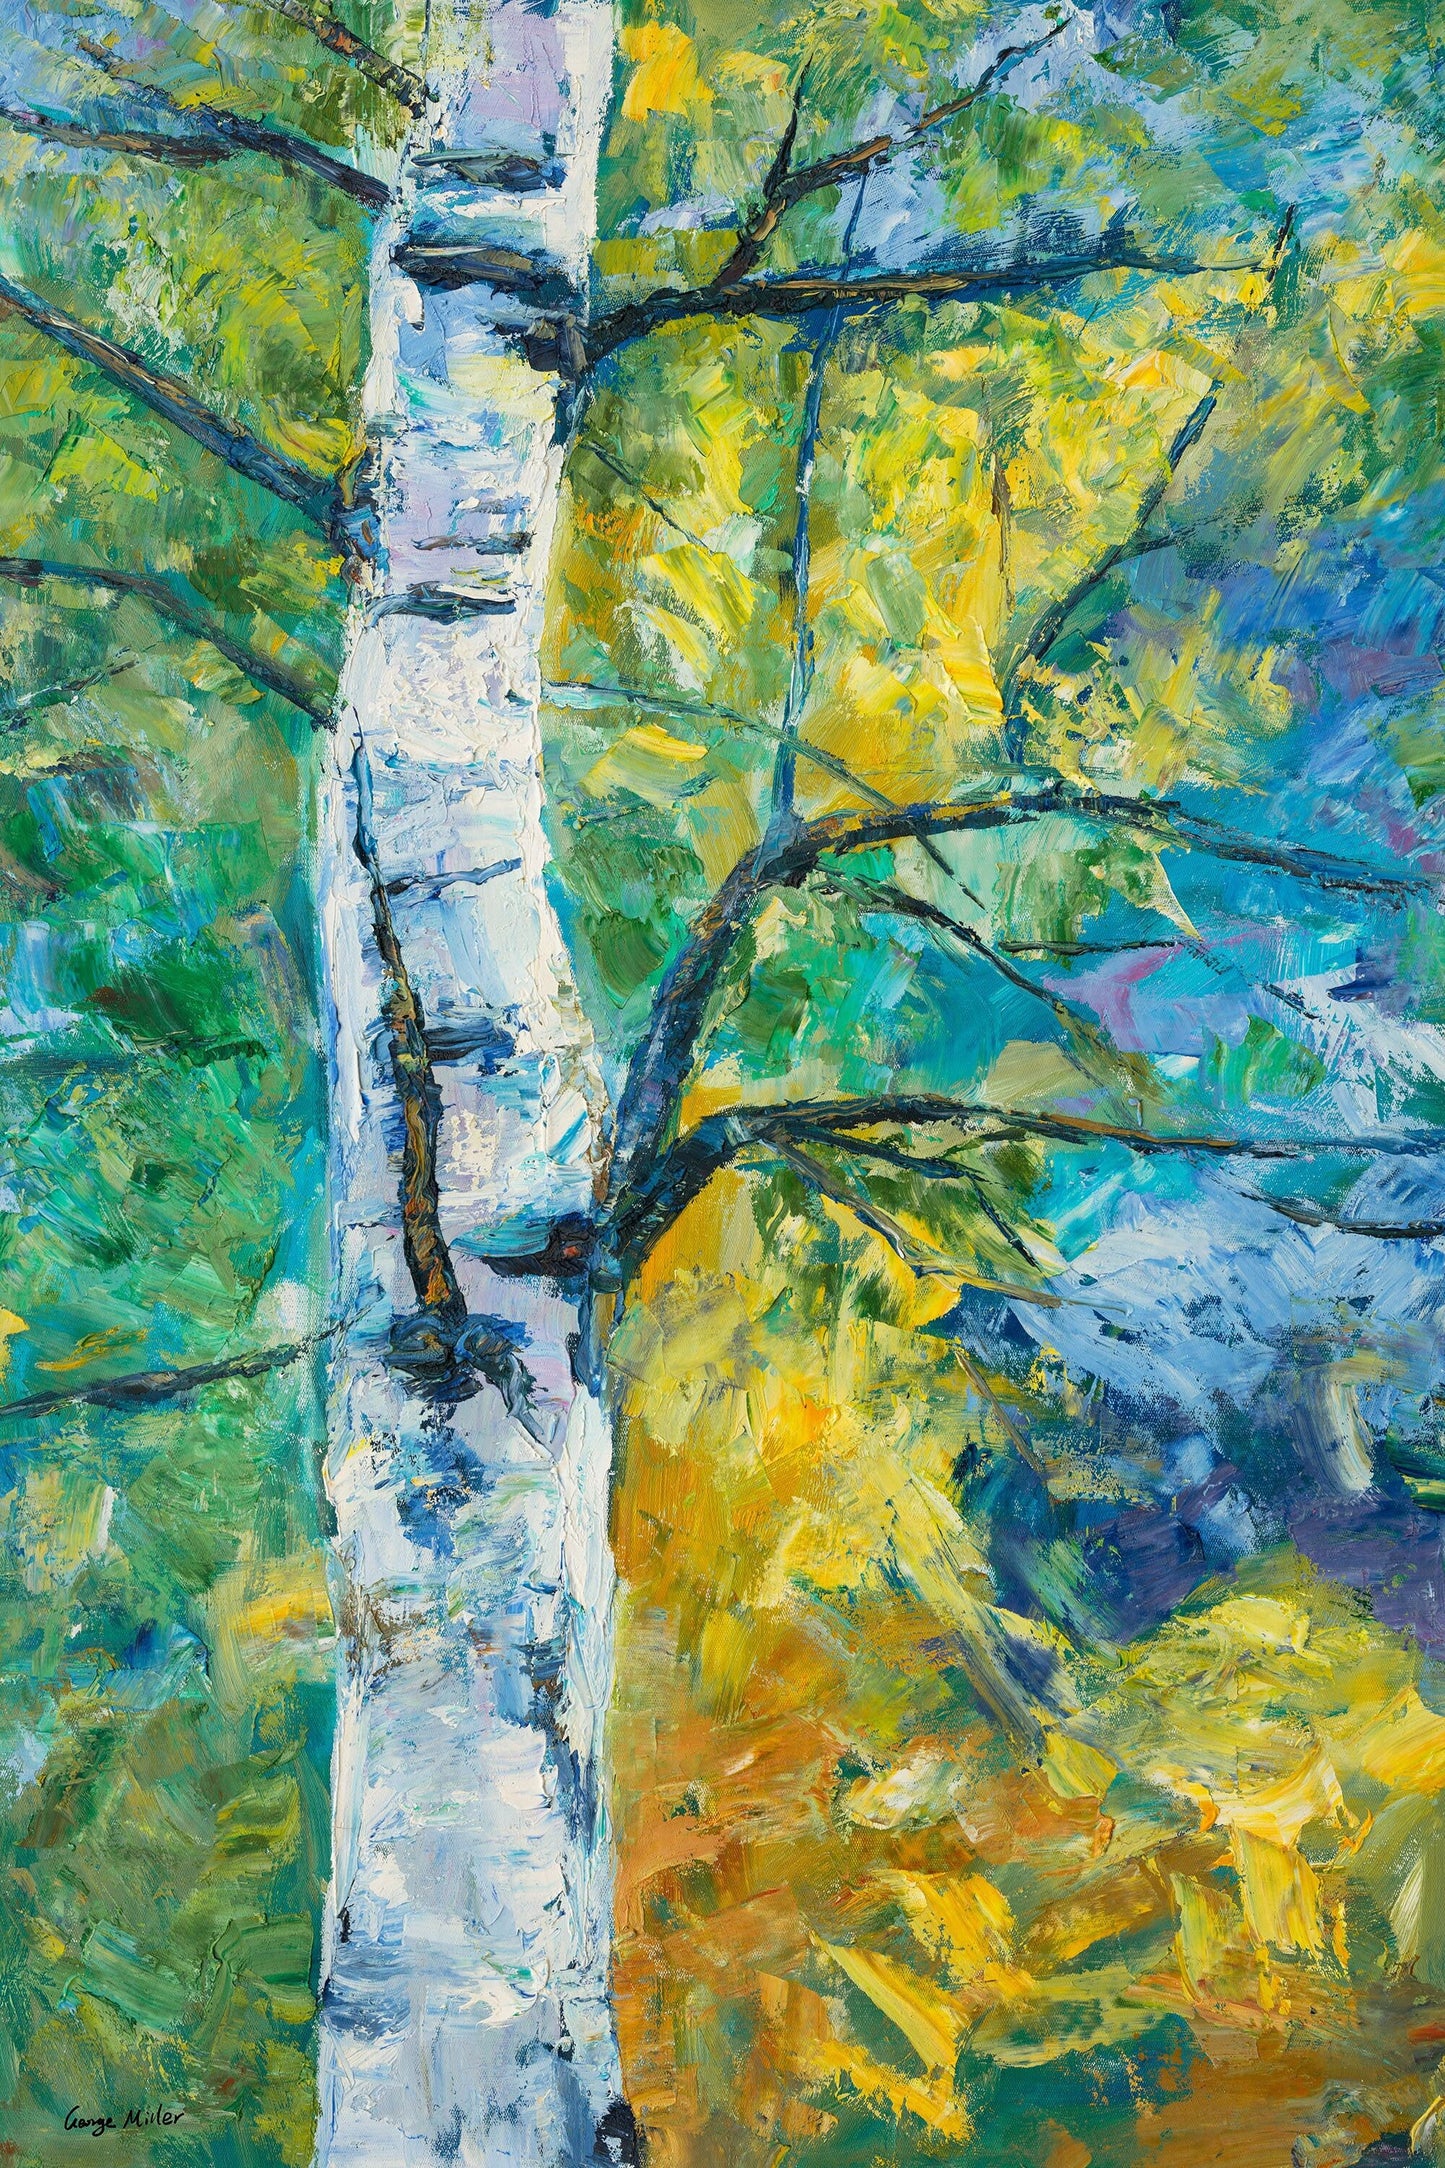 Oil Painting Silver Birch Tree Spring, Canvas Painting, Oil On Canvas Painting, Landscape Painting, Large Canvas Art, Modern Wall Art